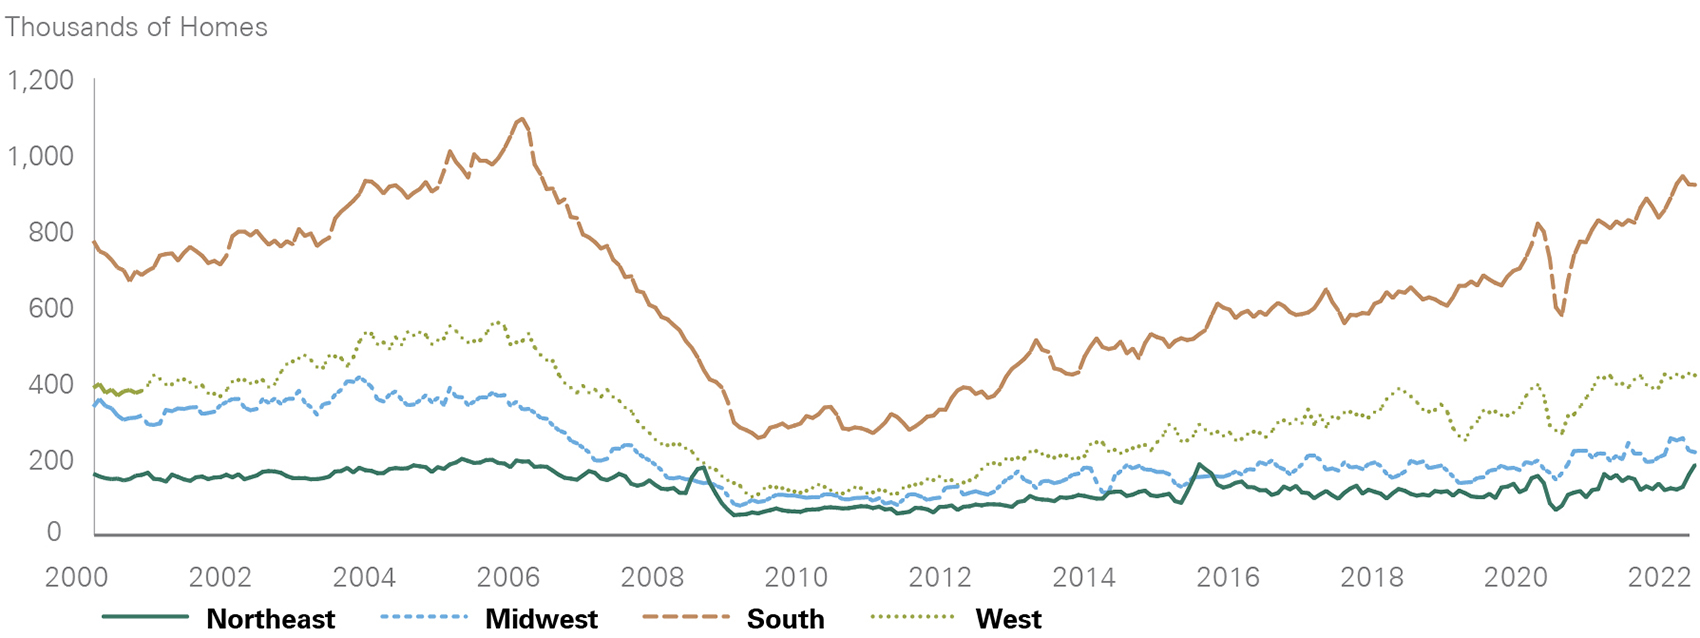 Regional differences in housing starts create nuances to supply.